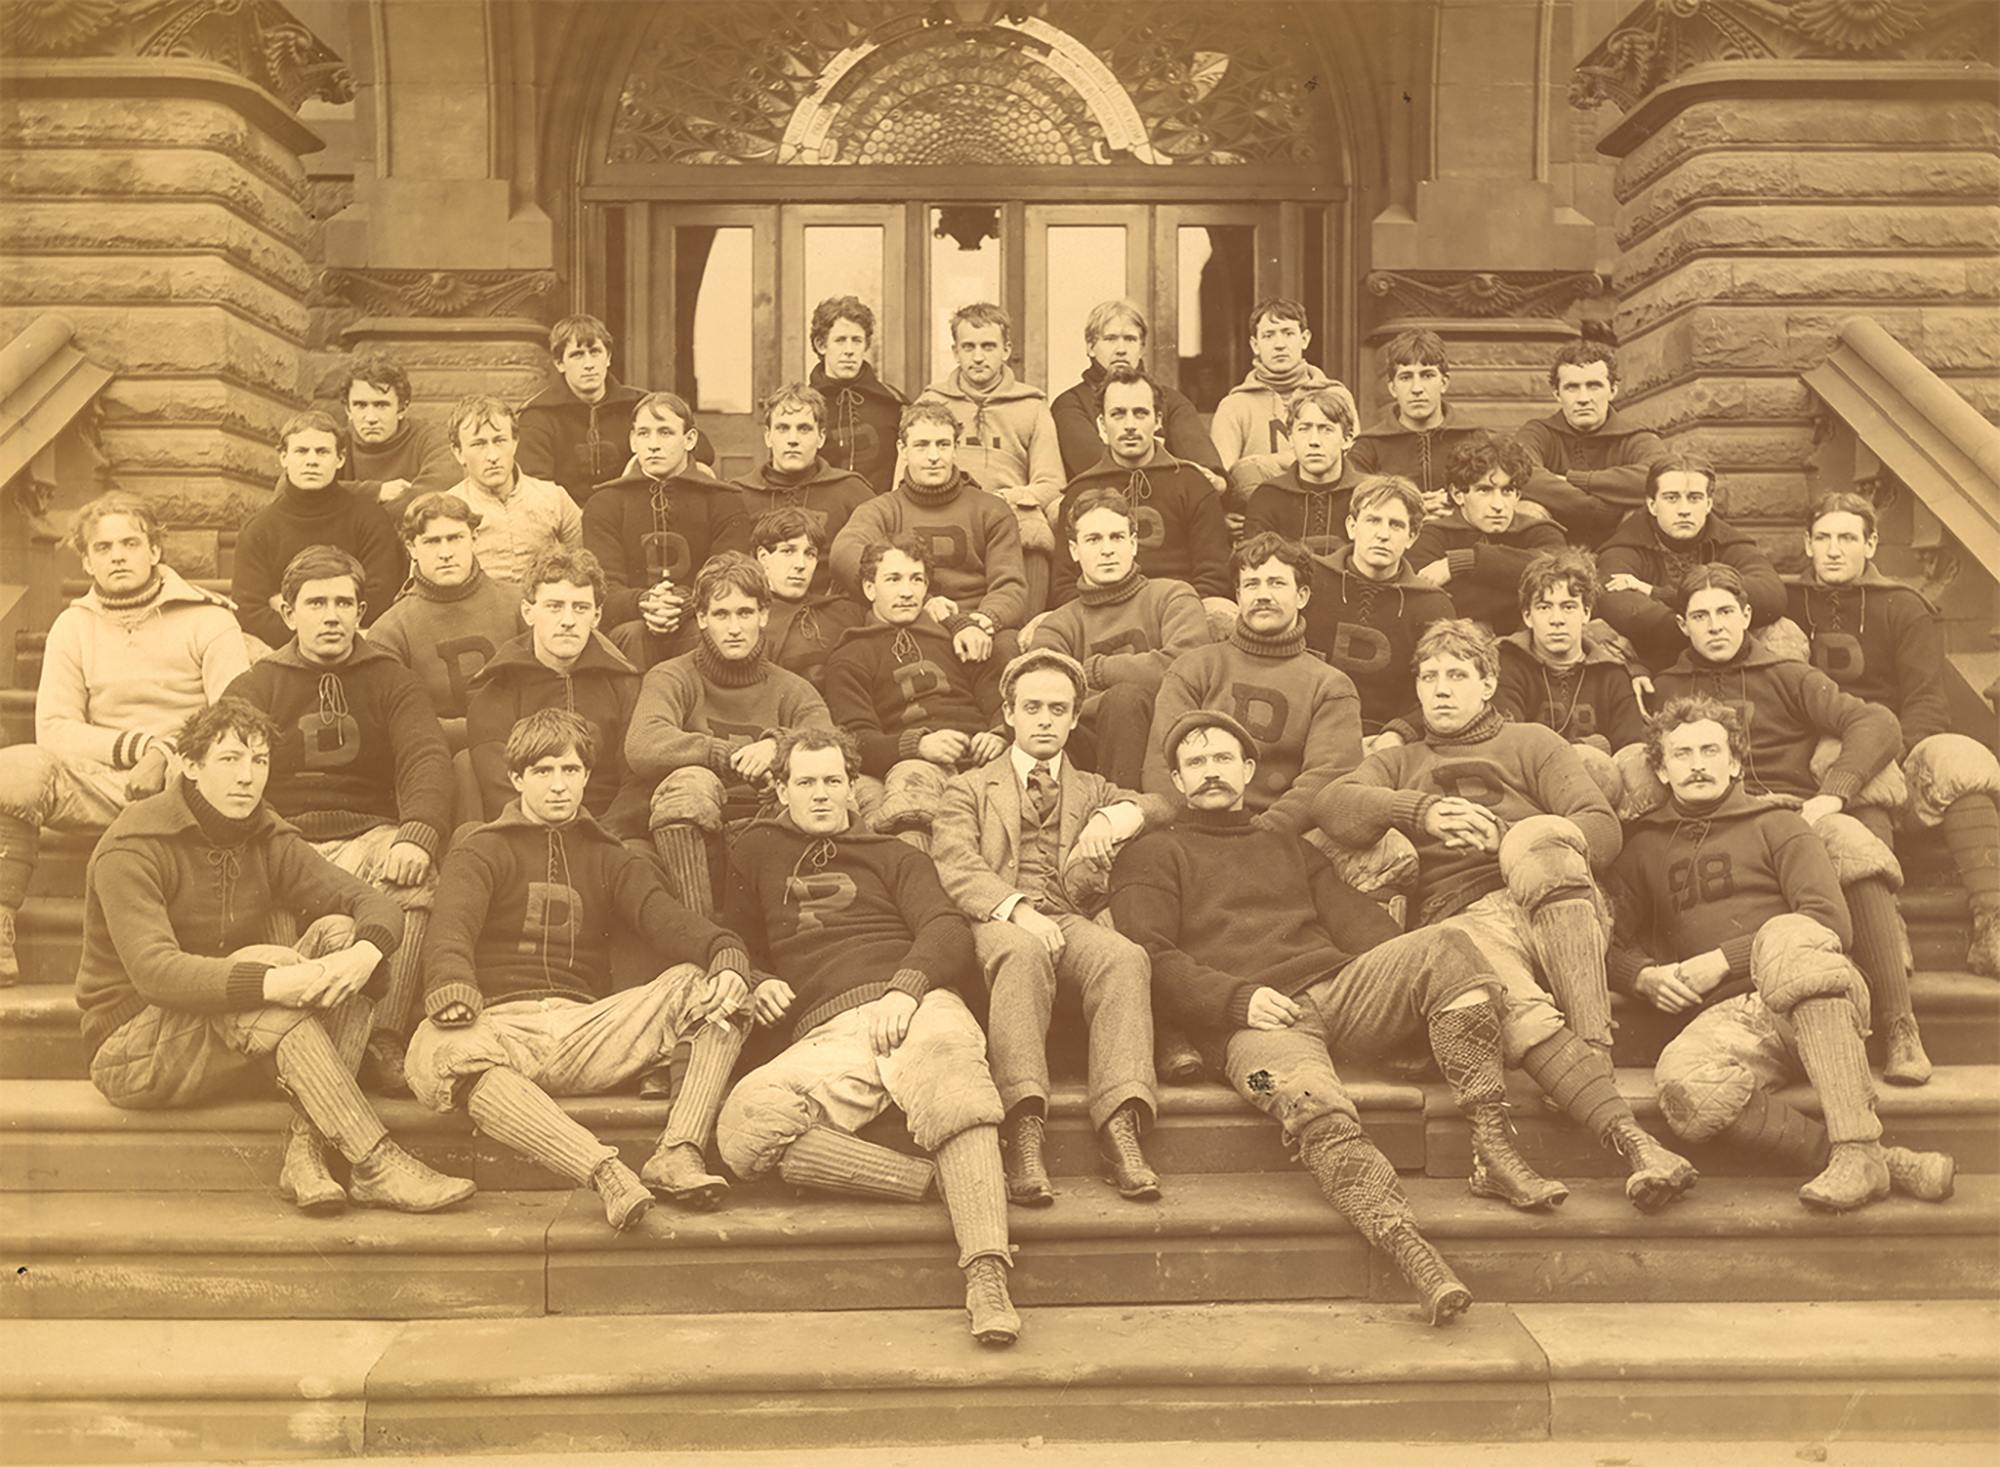 The 1895 Penn football team, which won the school’s second consecutive national championship, poses together on steps.